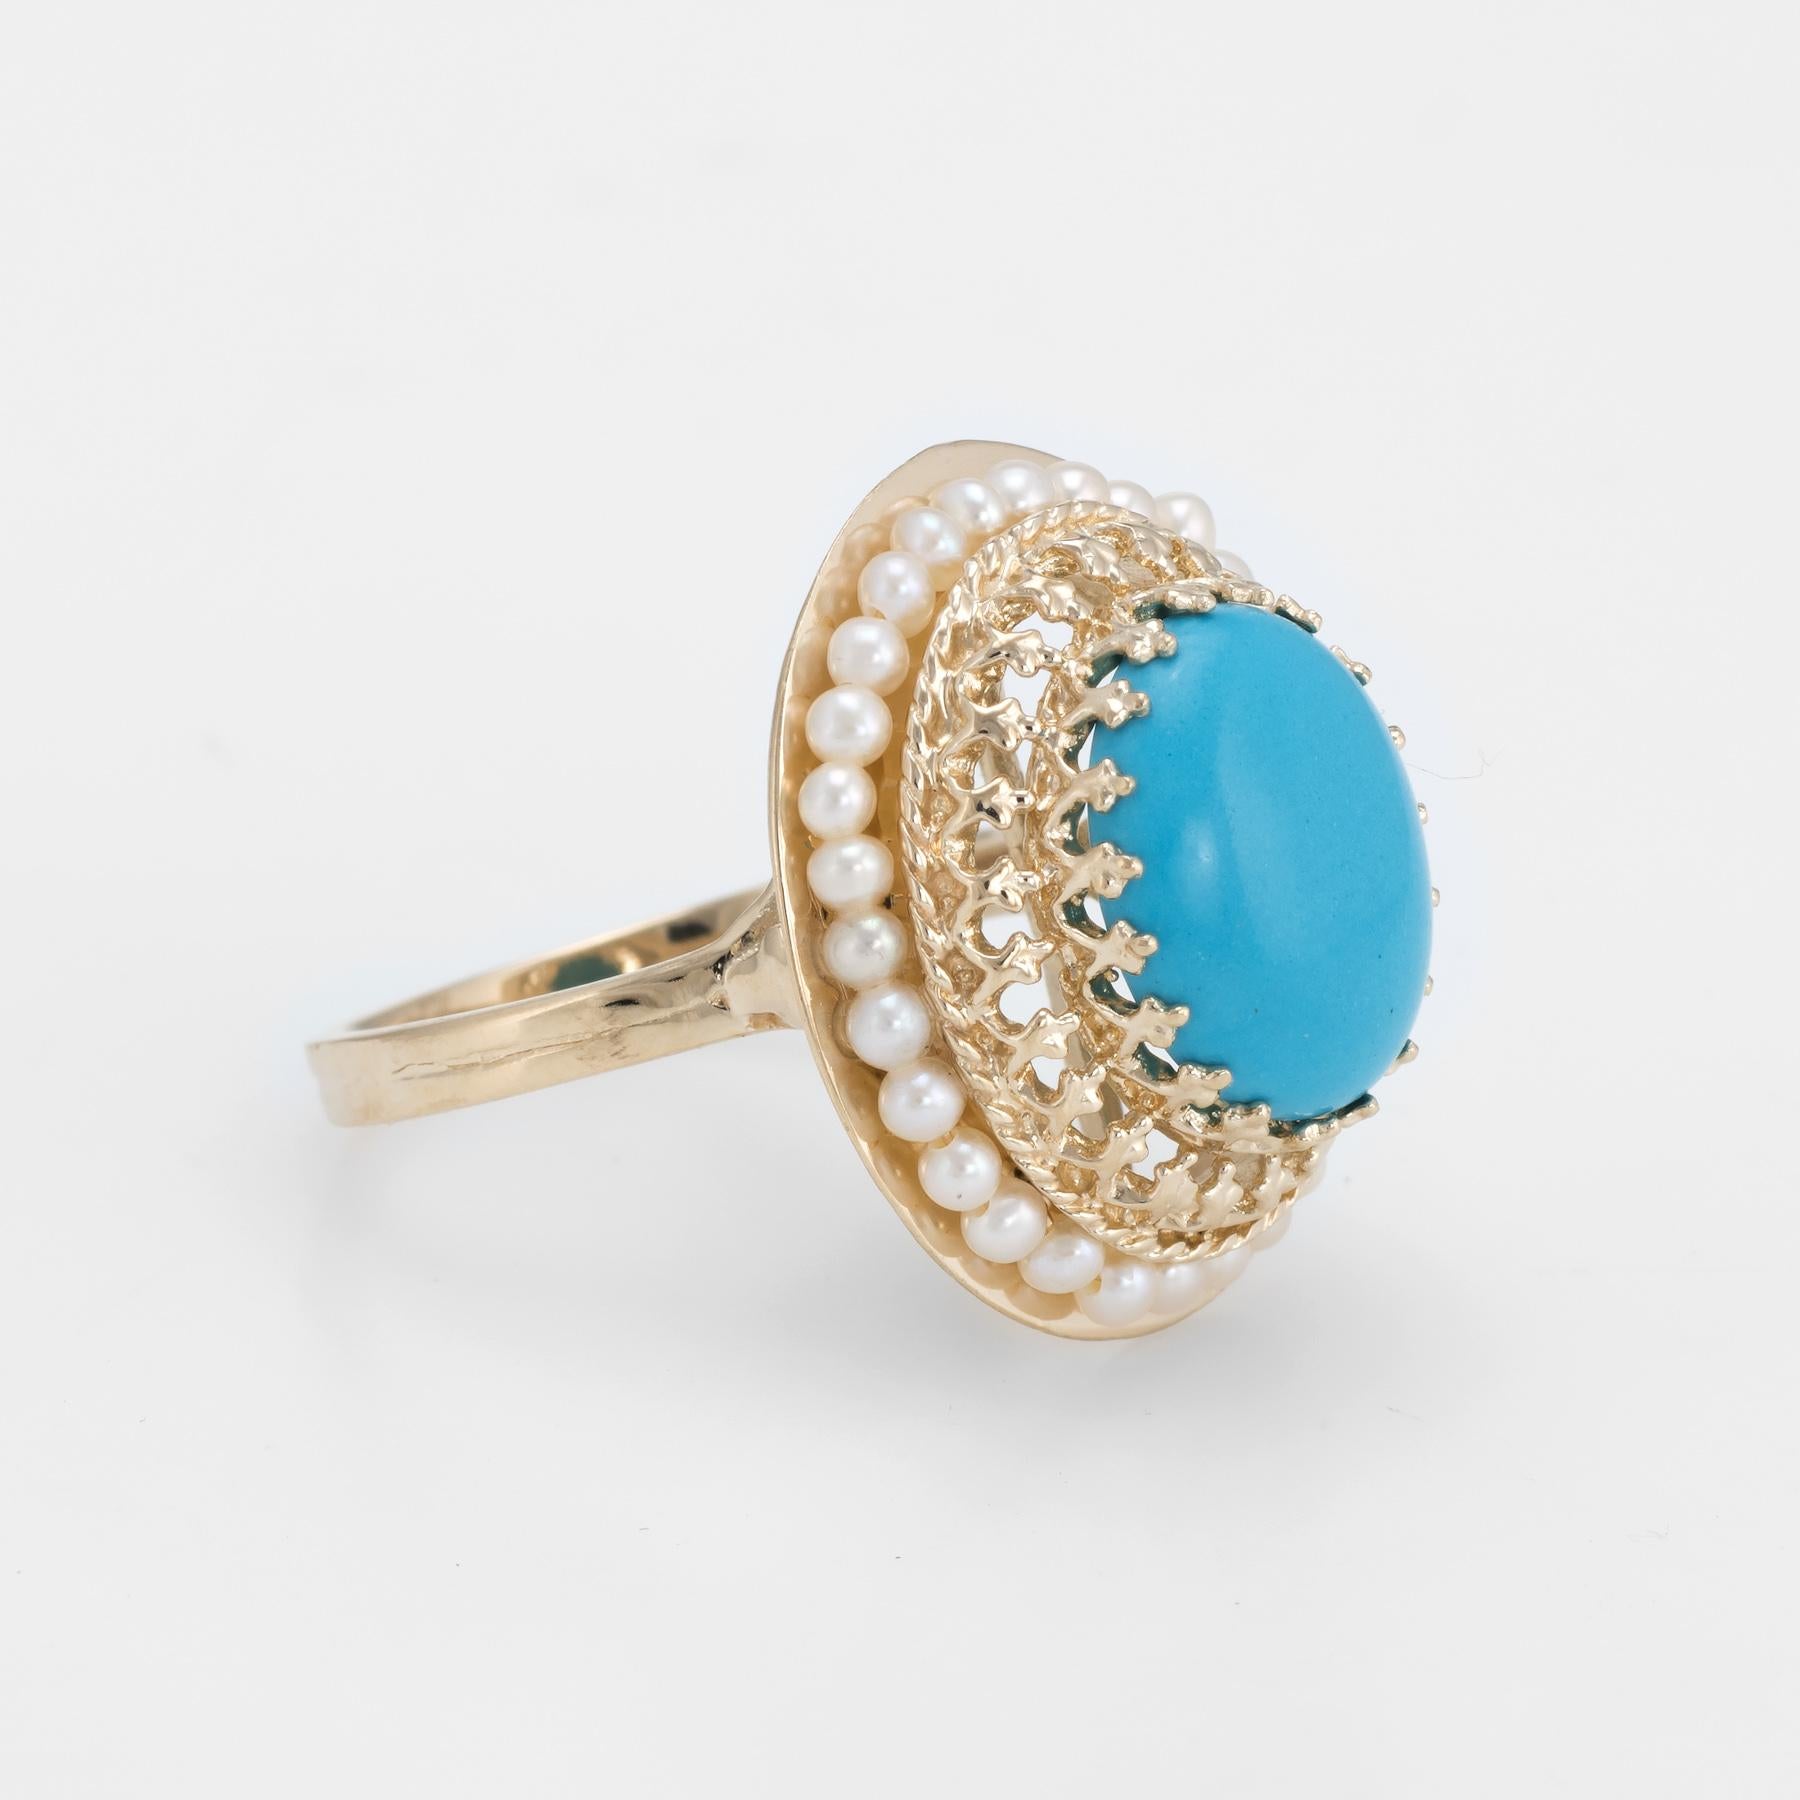 Oval Cut Turquoise Seed Pearl Oval Cocktail Ring Estate 14 Karat Gold 6 Fine Jewelry